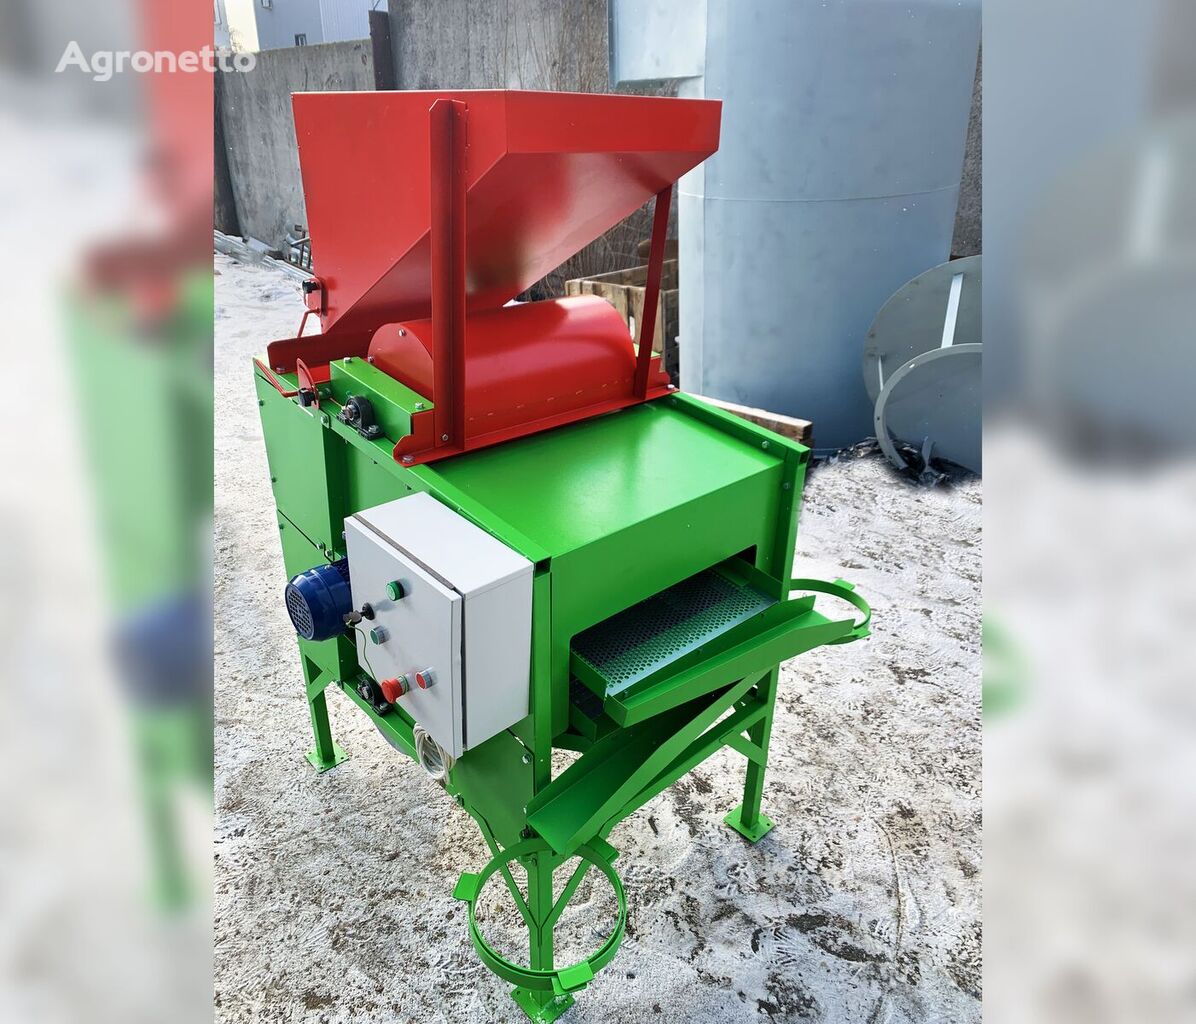 new Seed / Grain cleaner. Calibrator / separator up to 600 kg / h